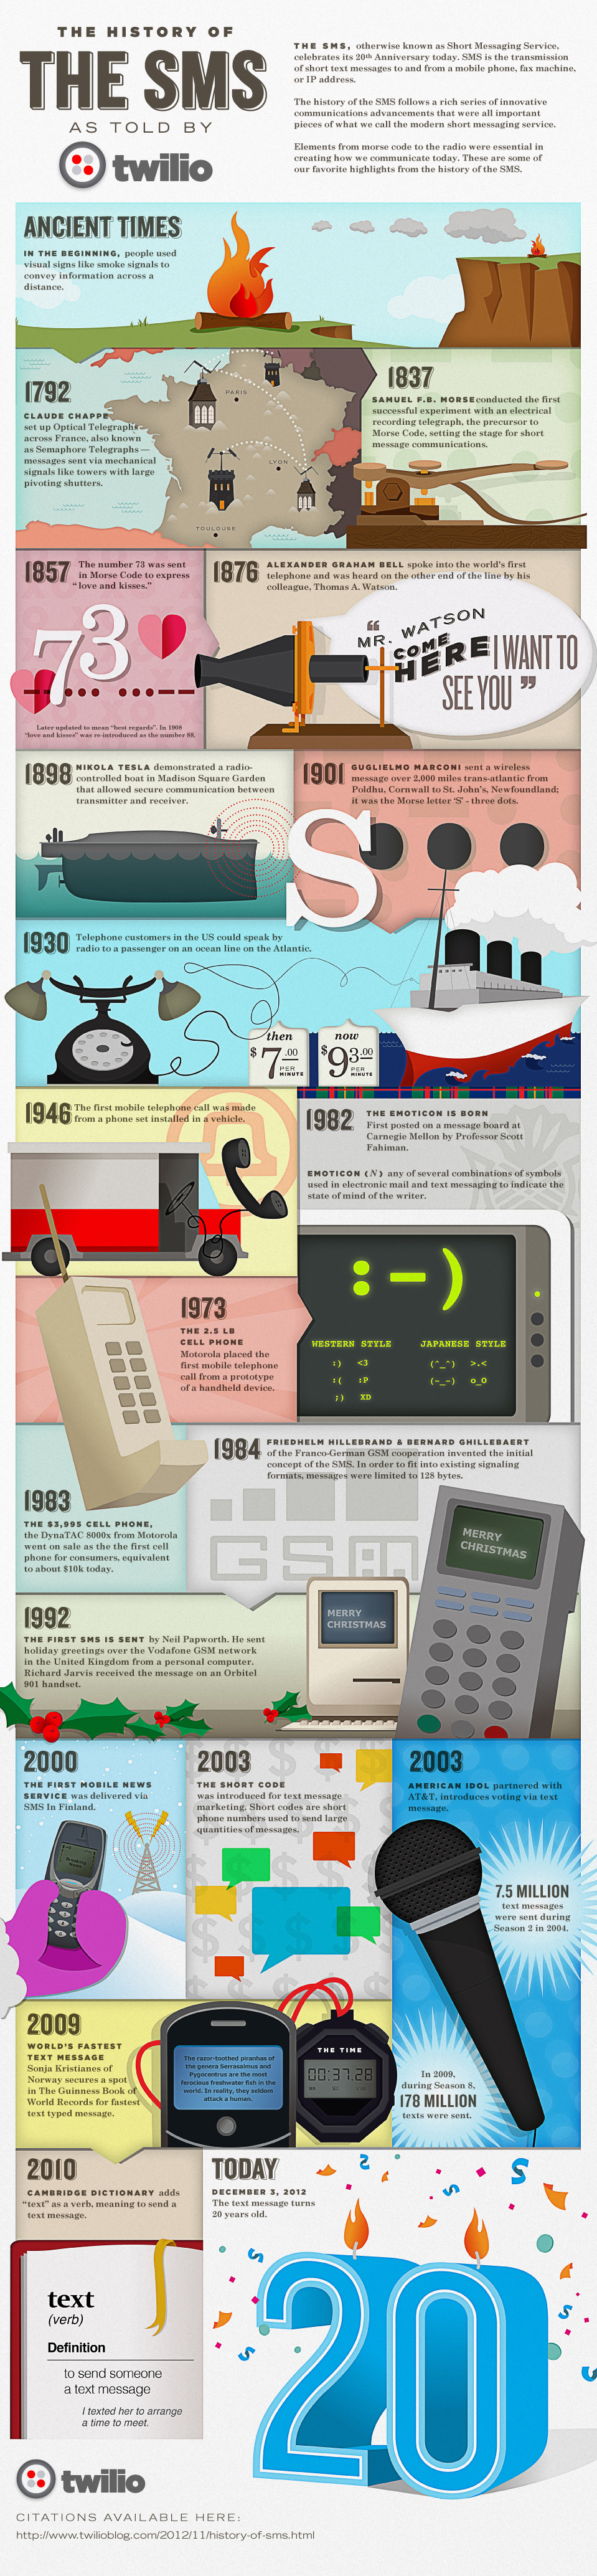 History of SMS